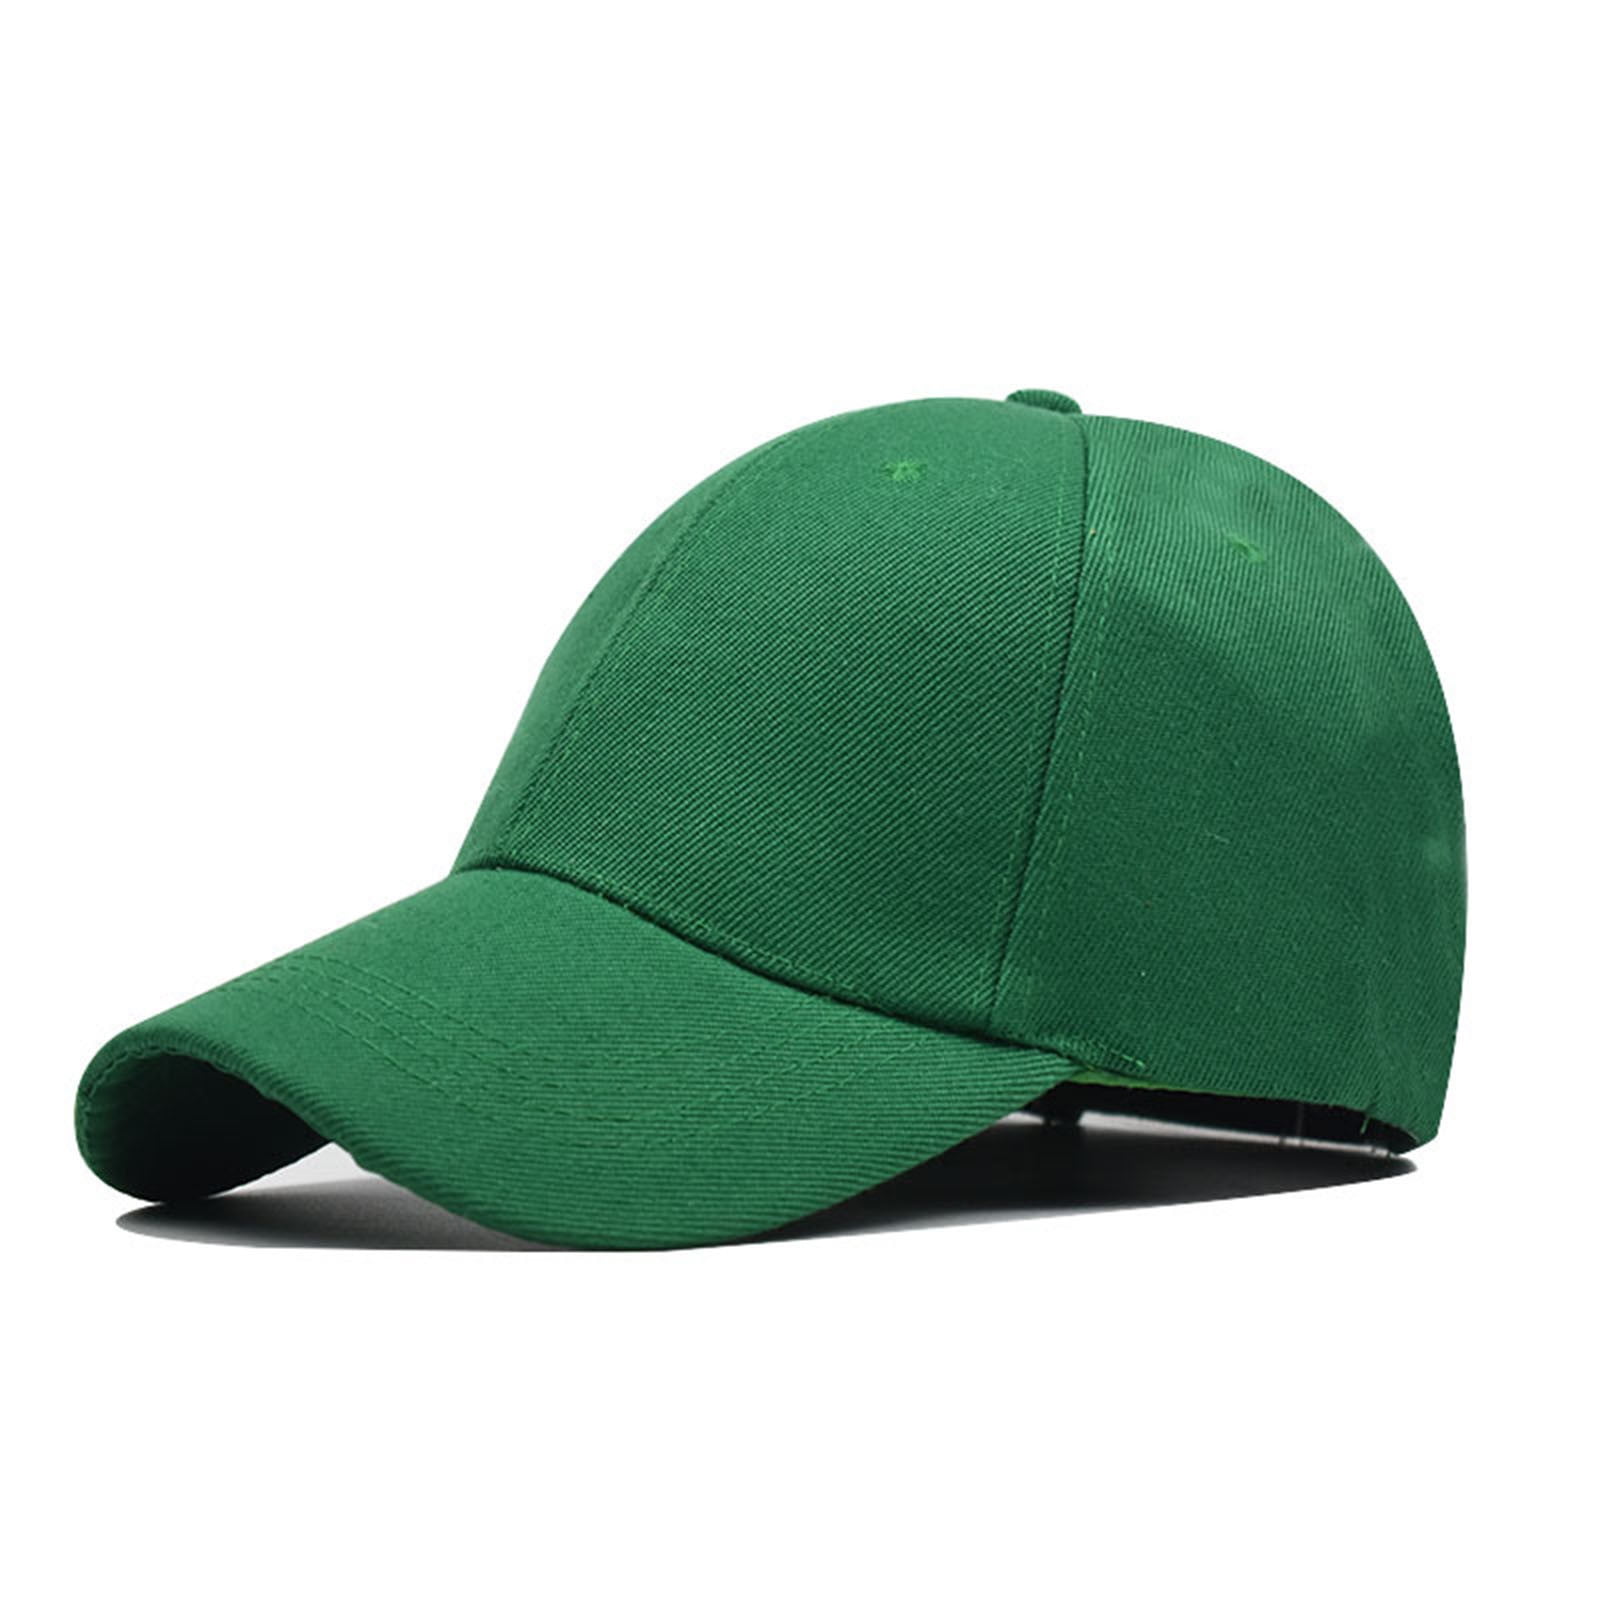 Sksloeg Hats for Men and Women Adjustable Size for Running Workouts and  Outdoor Activities All Seasons,Dark Green One Size